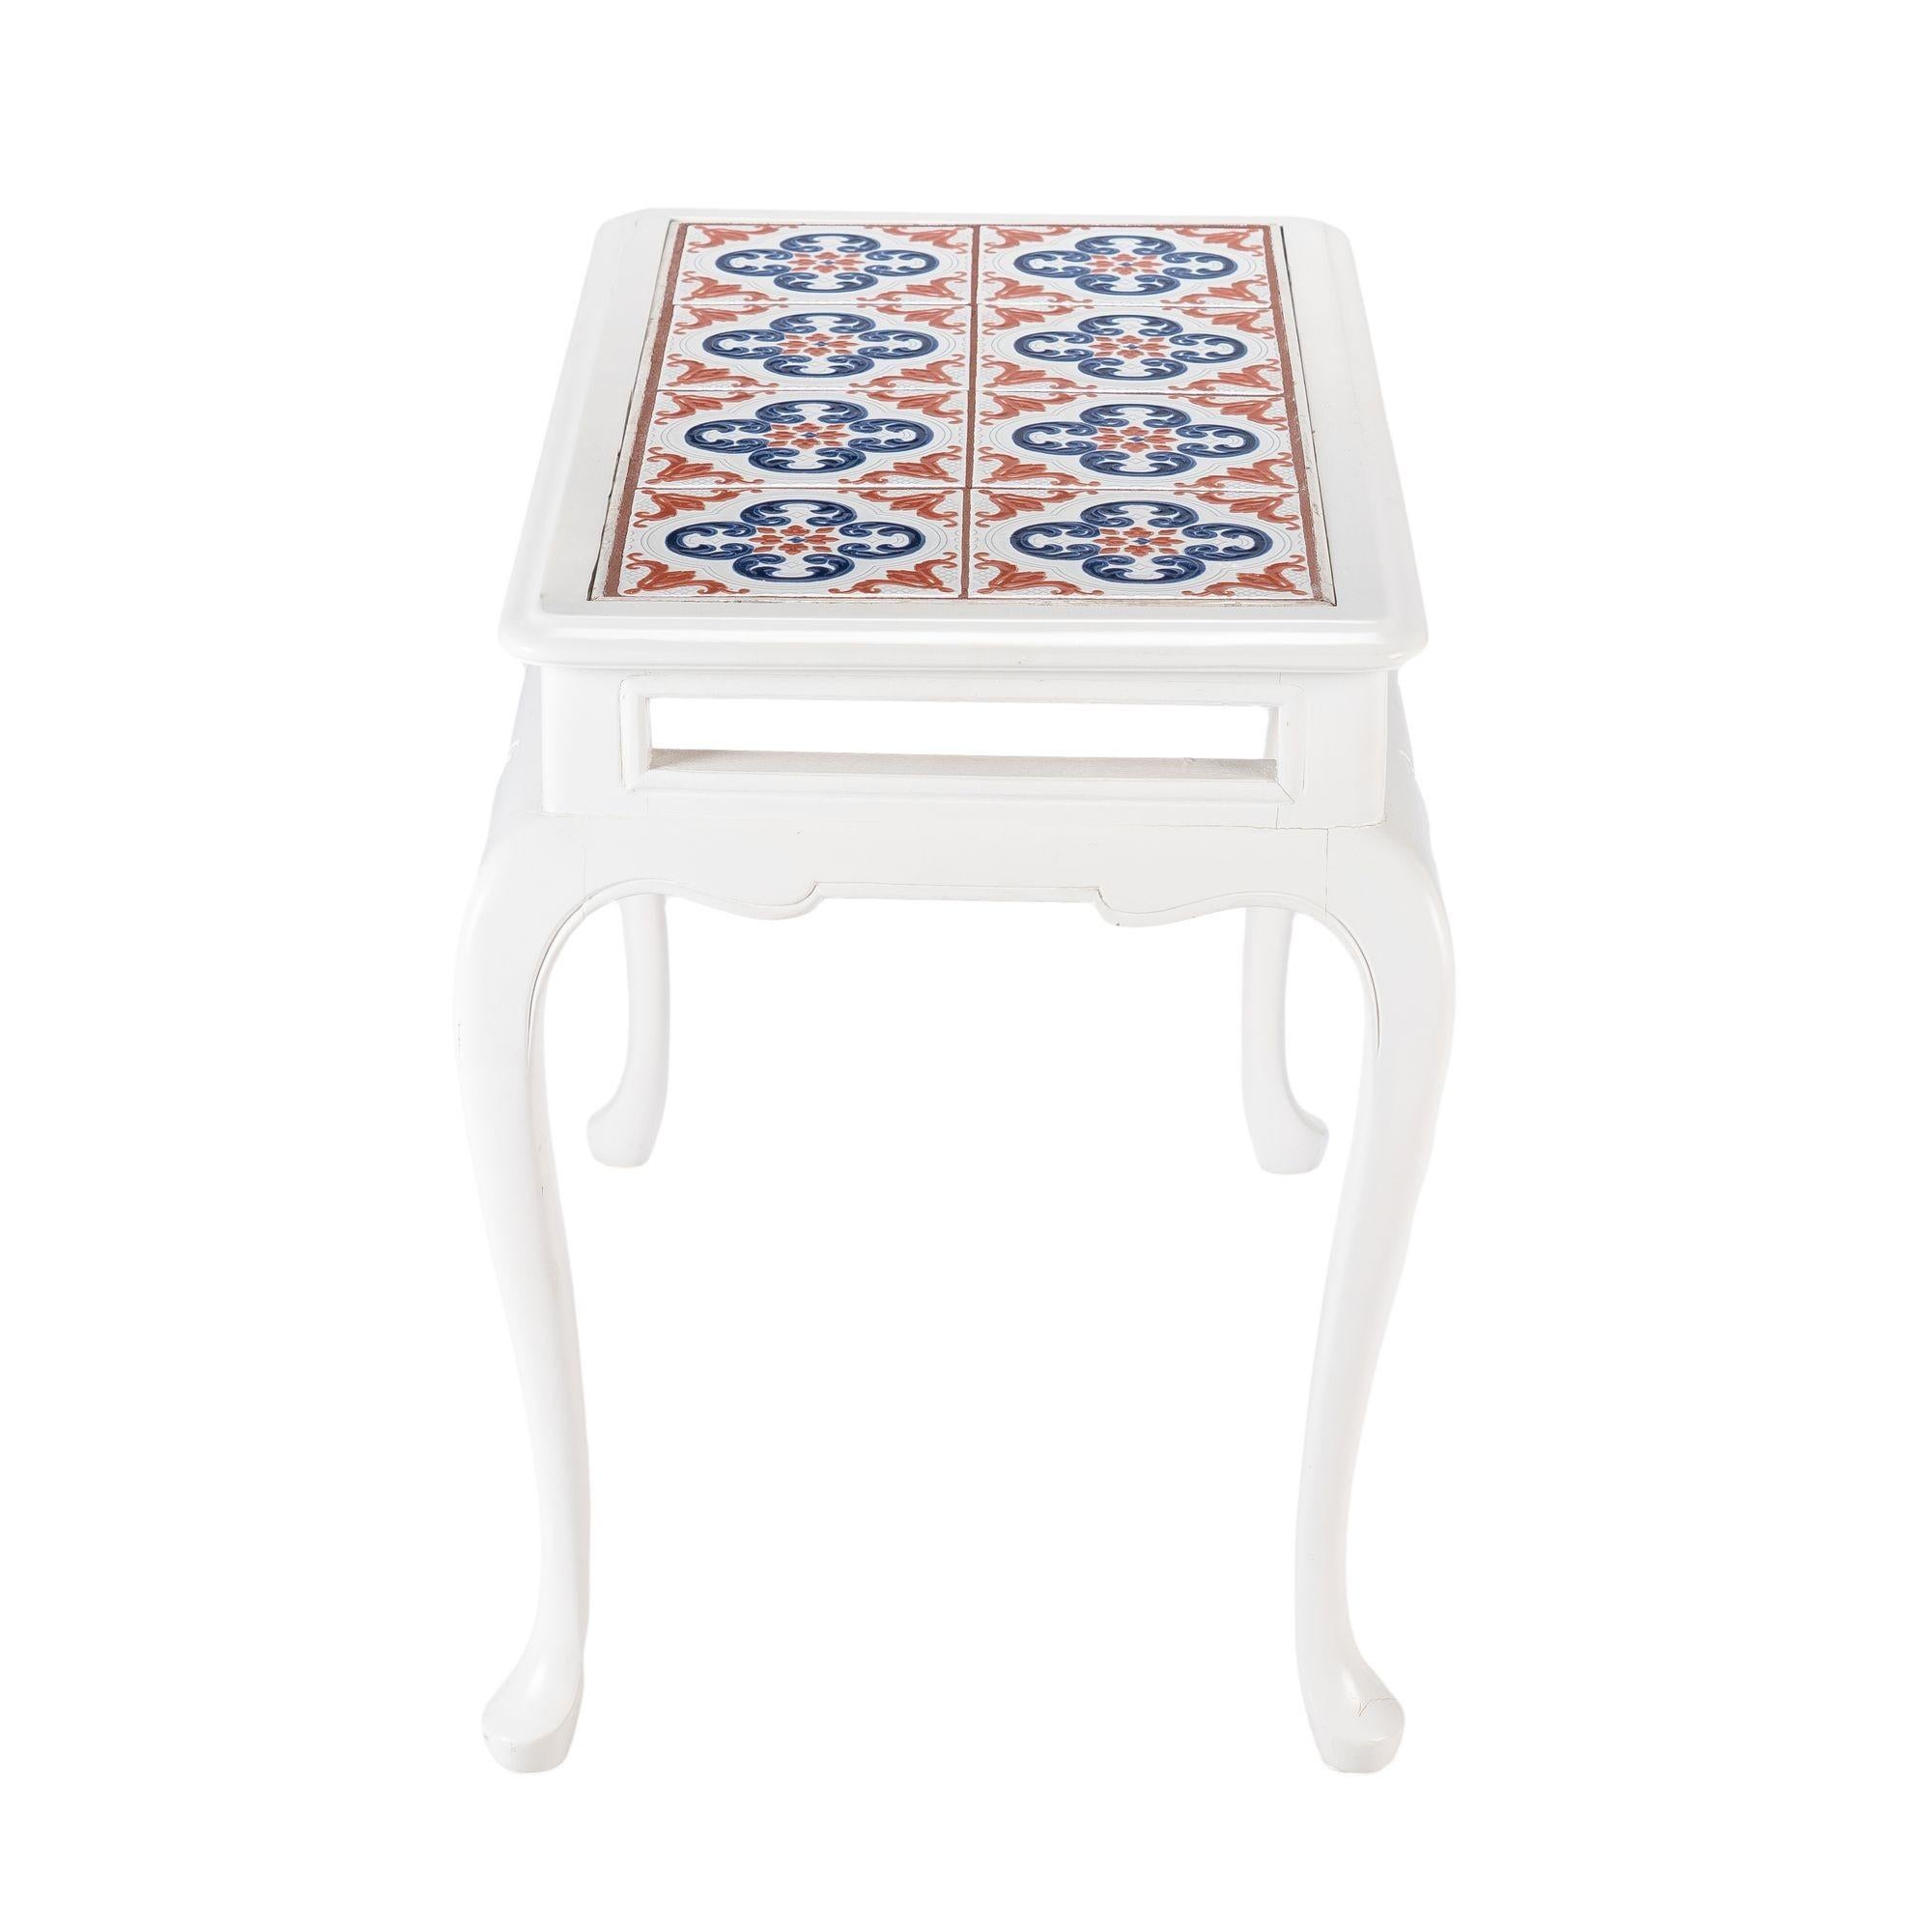 20th Century Painted Queen Anne style hardwood tiled coffee table, 1950's For Sale